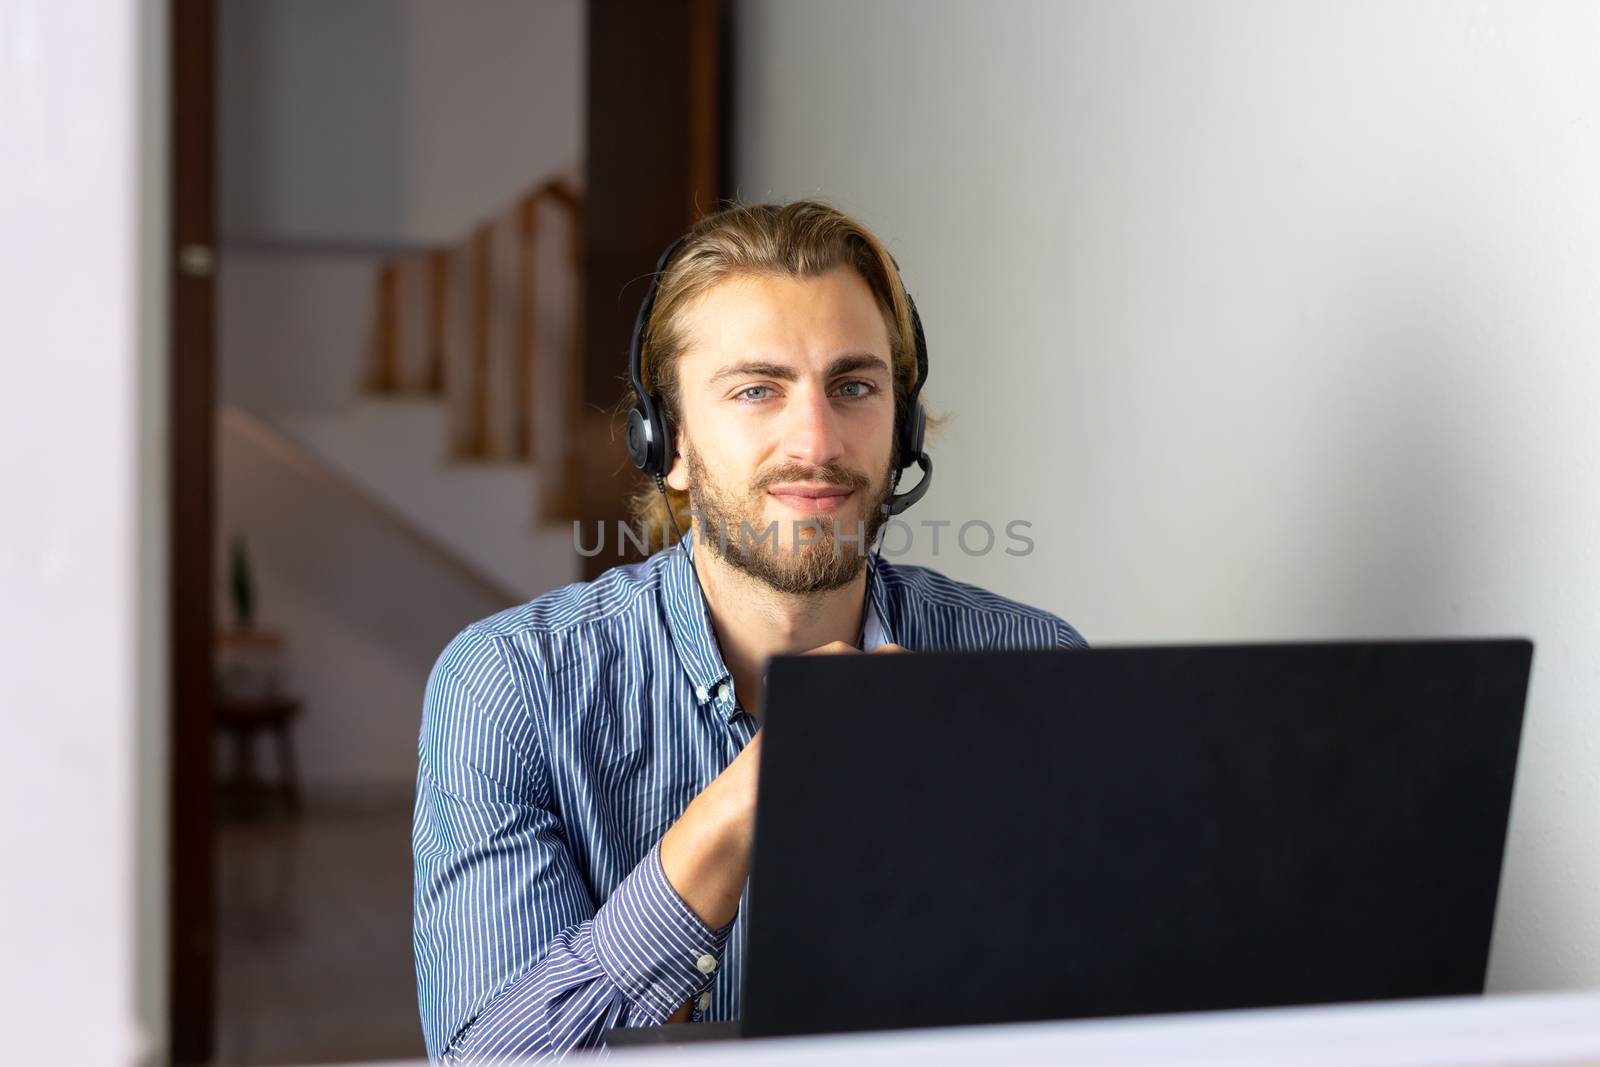 Blond male working from home with headphones using wireless internet on laptop, man call center agent or telemarketer